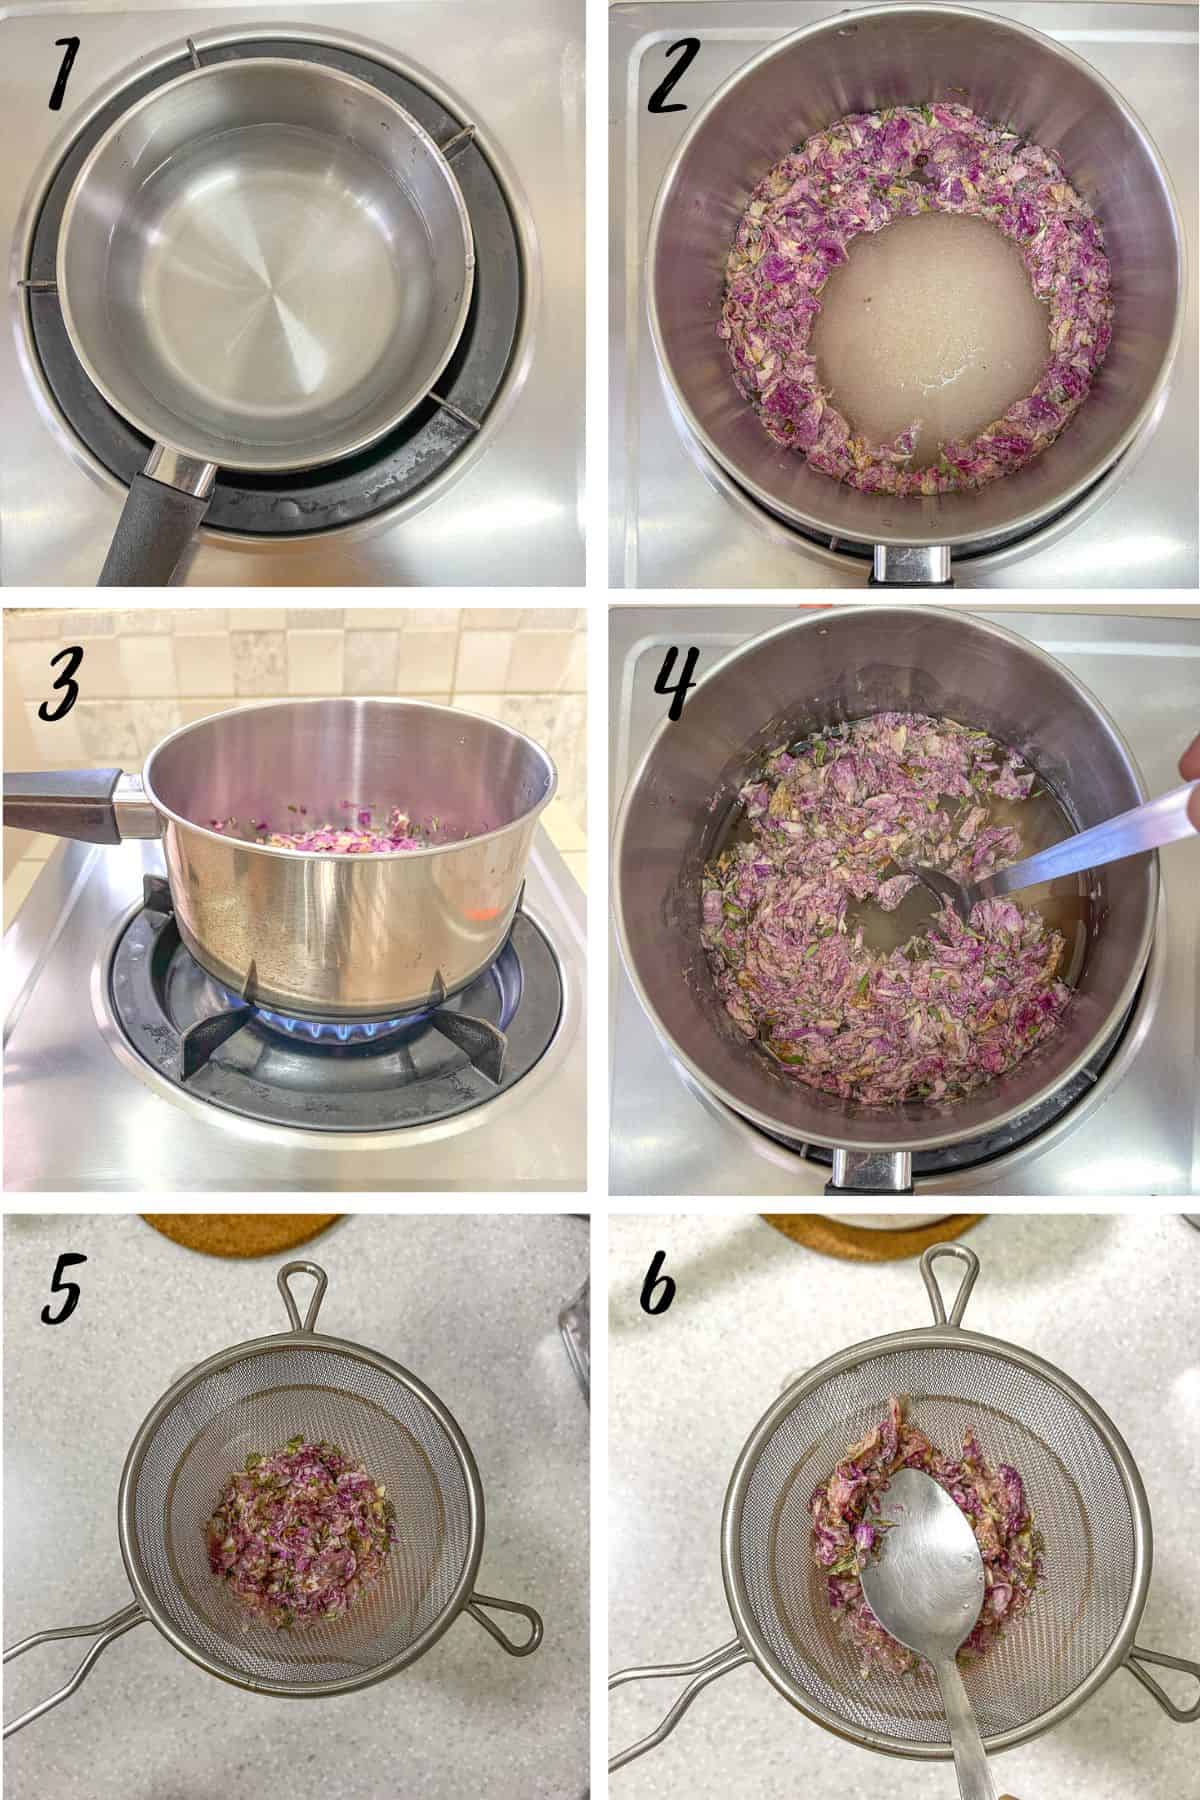 A poster of 6 images showing how to cook flower petals with sugar.